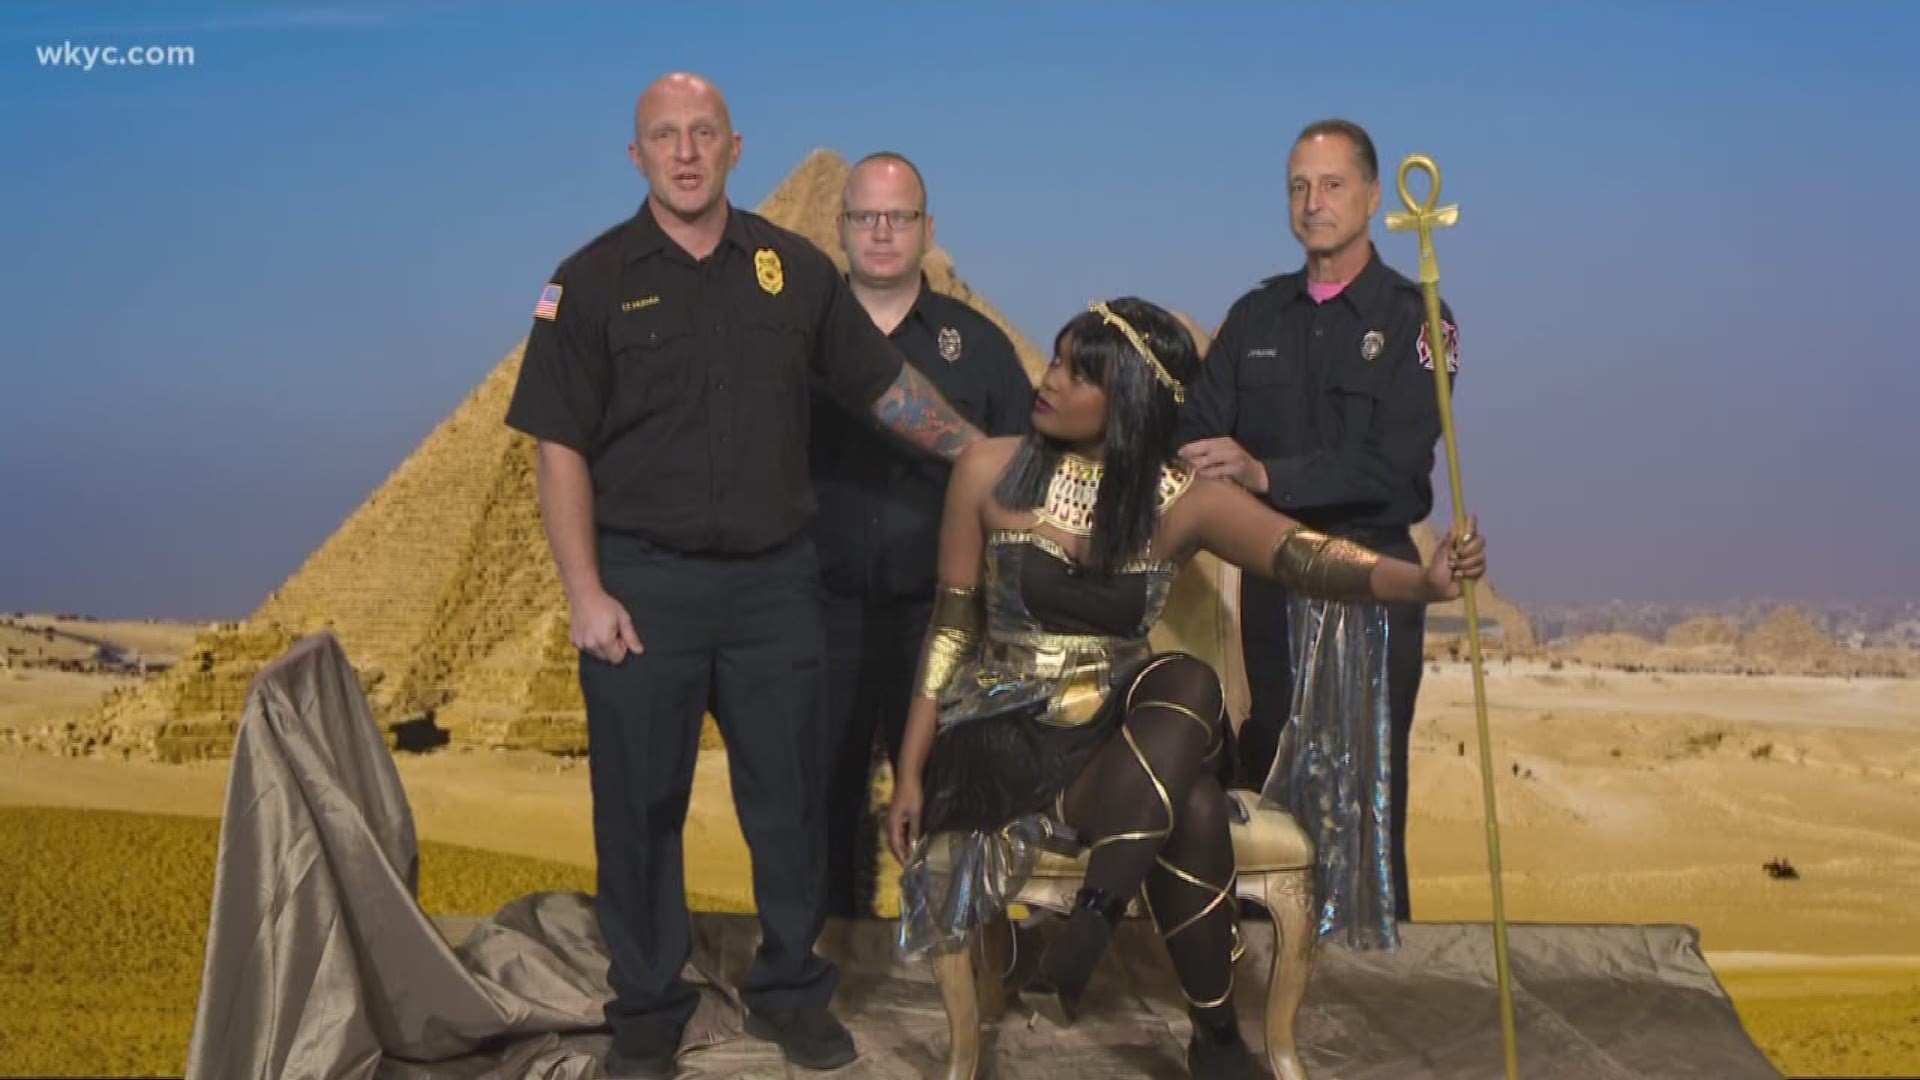 From Queen Bey to Thor, WKYC's morning show reveals their creative Halloween costumes.